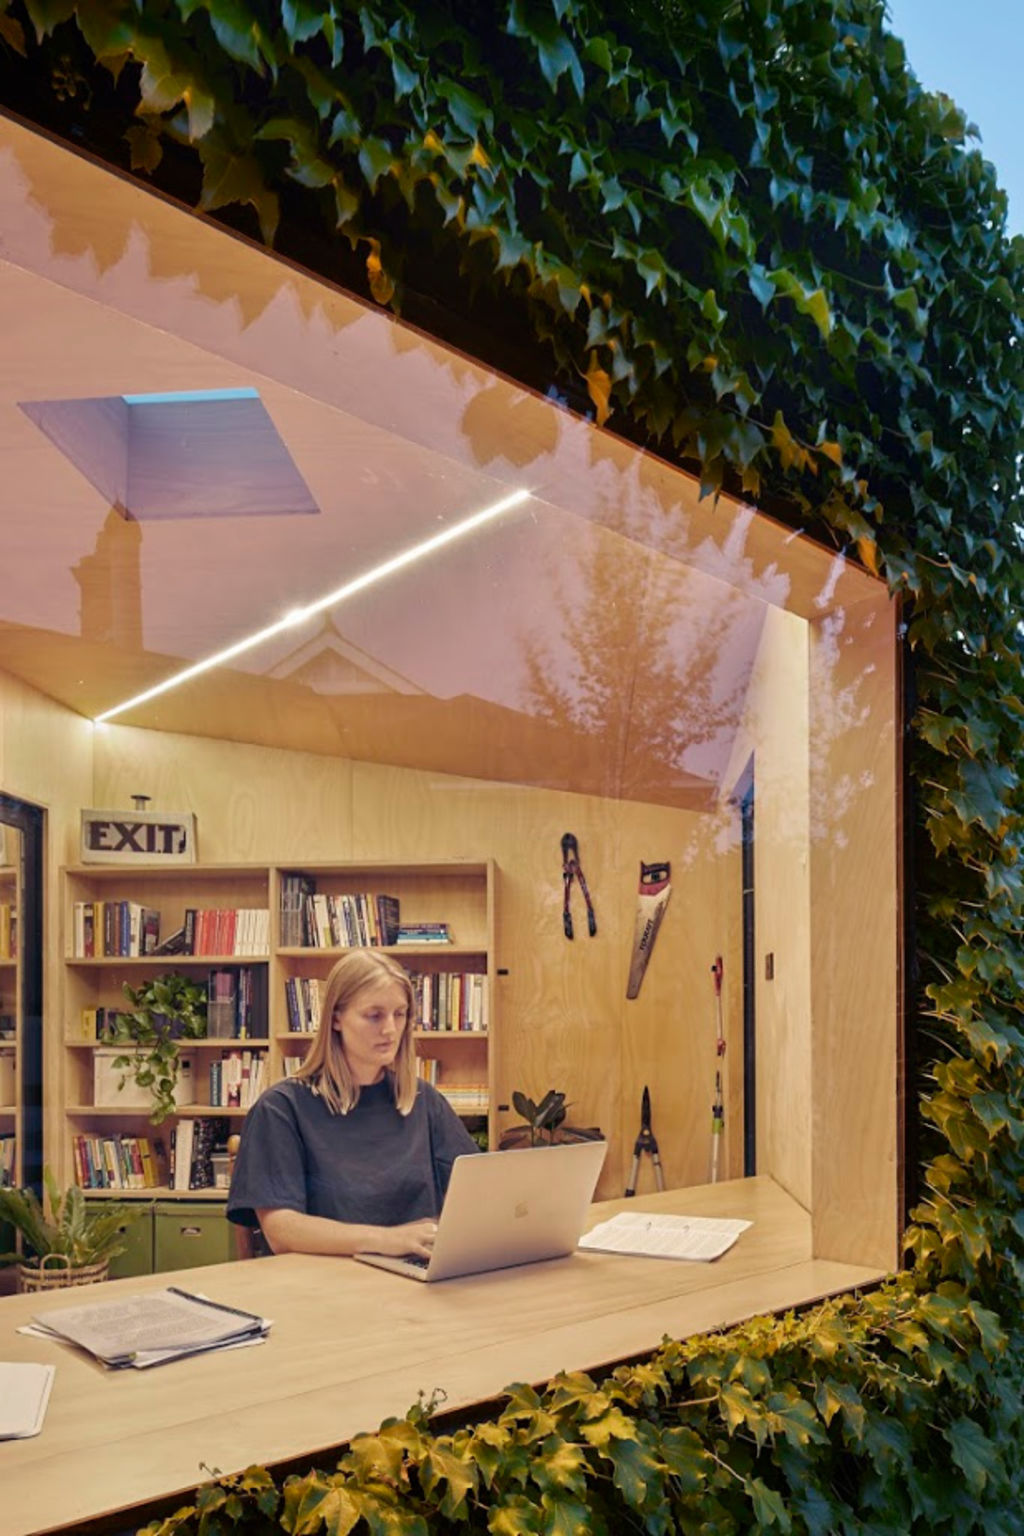 The architect says the workspace is an 'antidote' to busy, noisy workplaces. Photo: Shannon McGrath